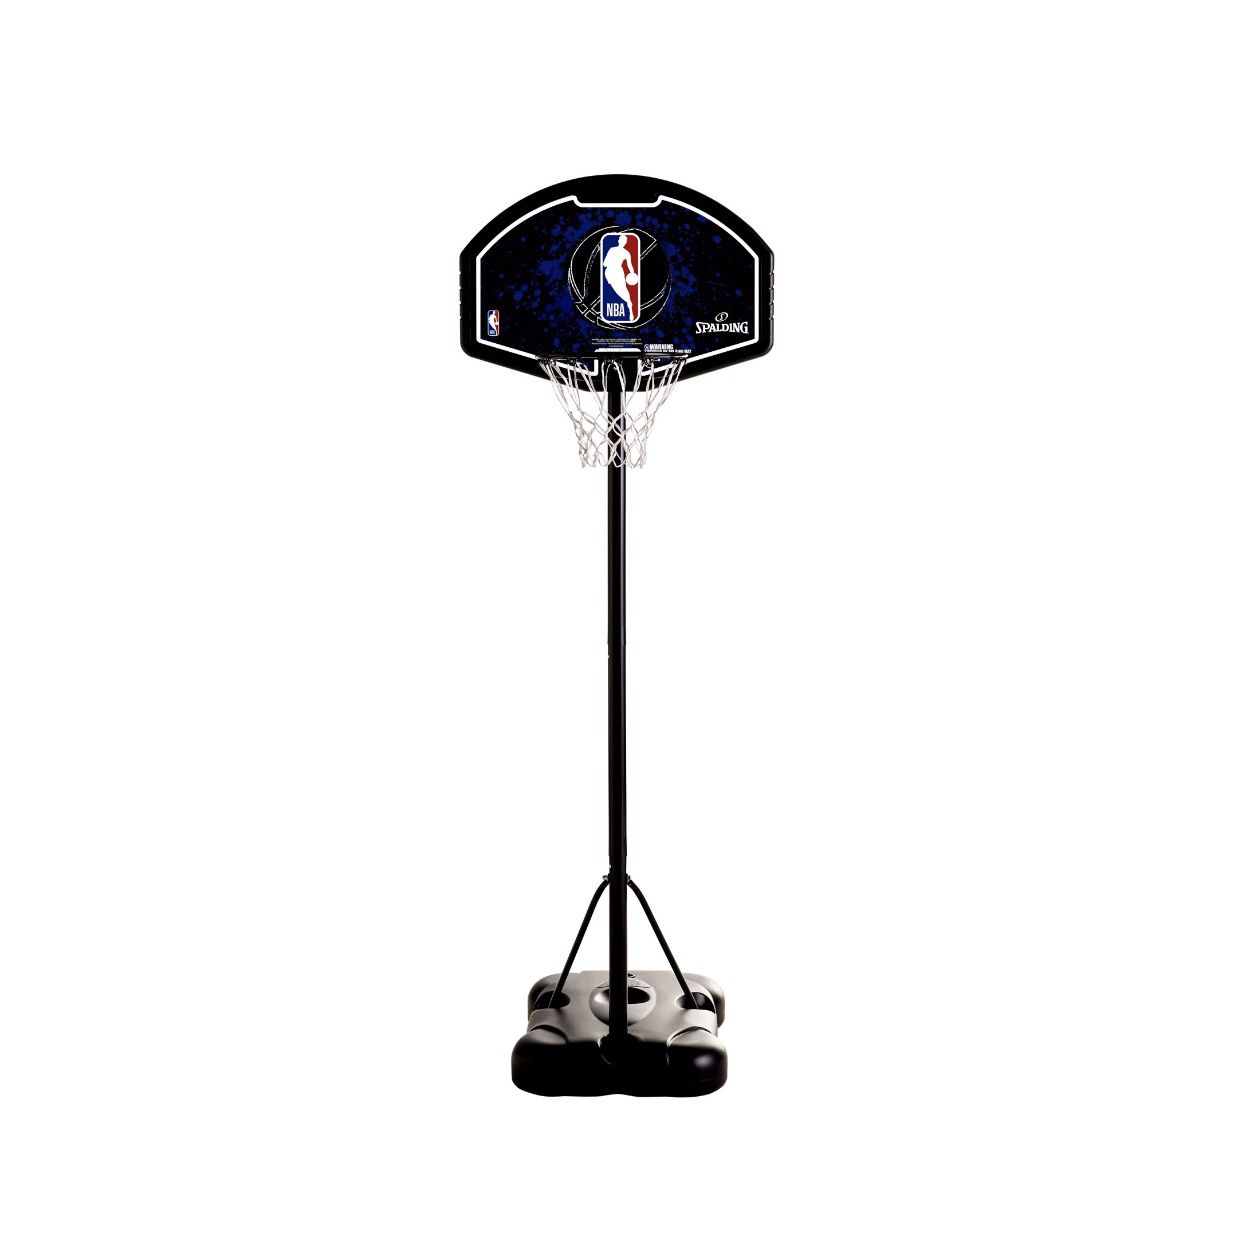 Spalding 32" Composite Portable Youth Basketball Hoop